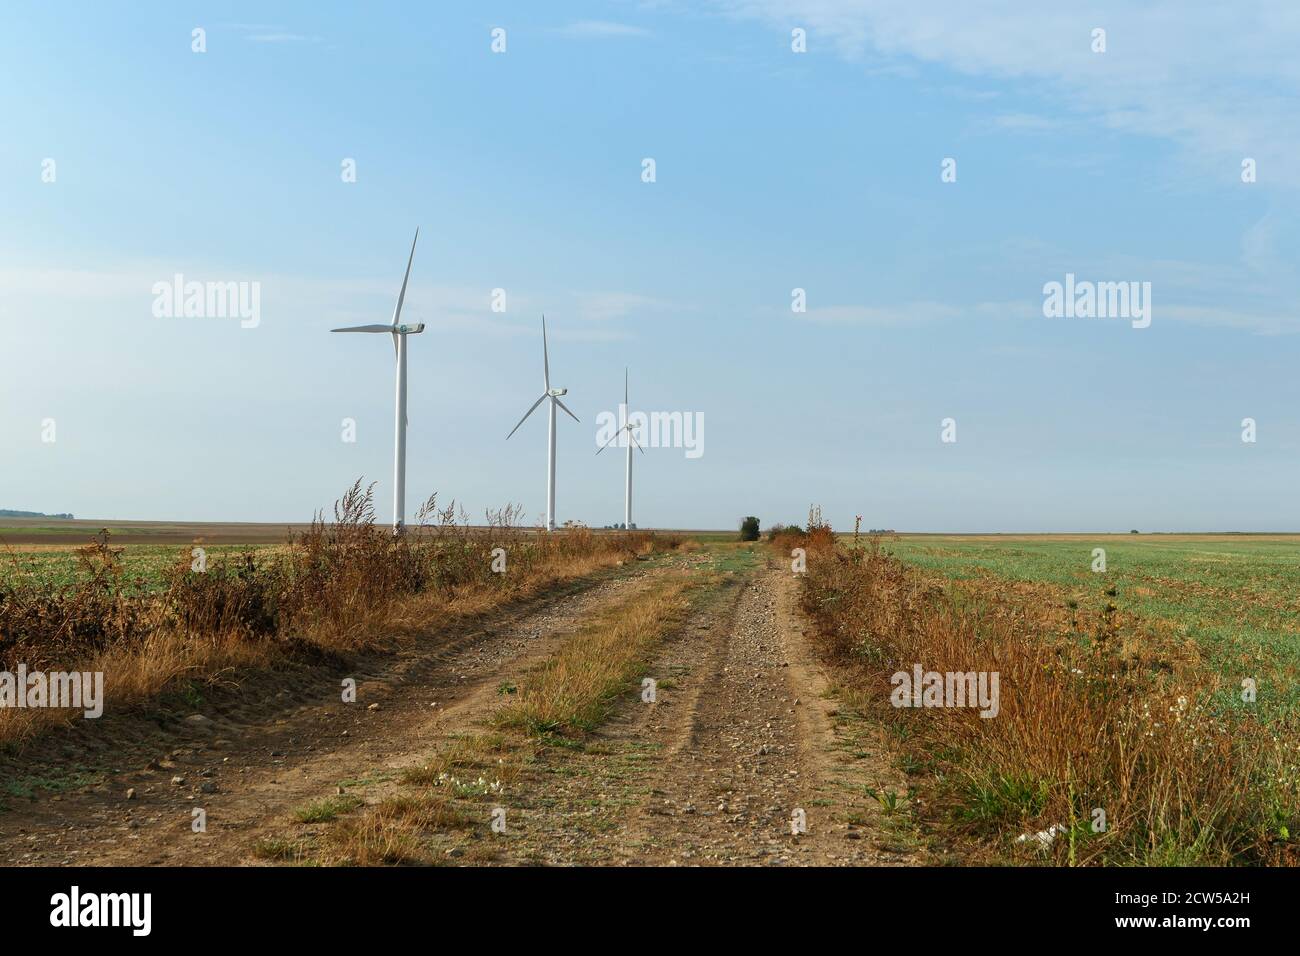 Saclas, France. September 20. 2020. Structure that works with the wind to generate electricity. Wind turbine lined up in a field. Renewable energy. Stock Photo